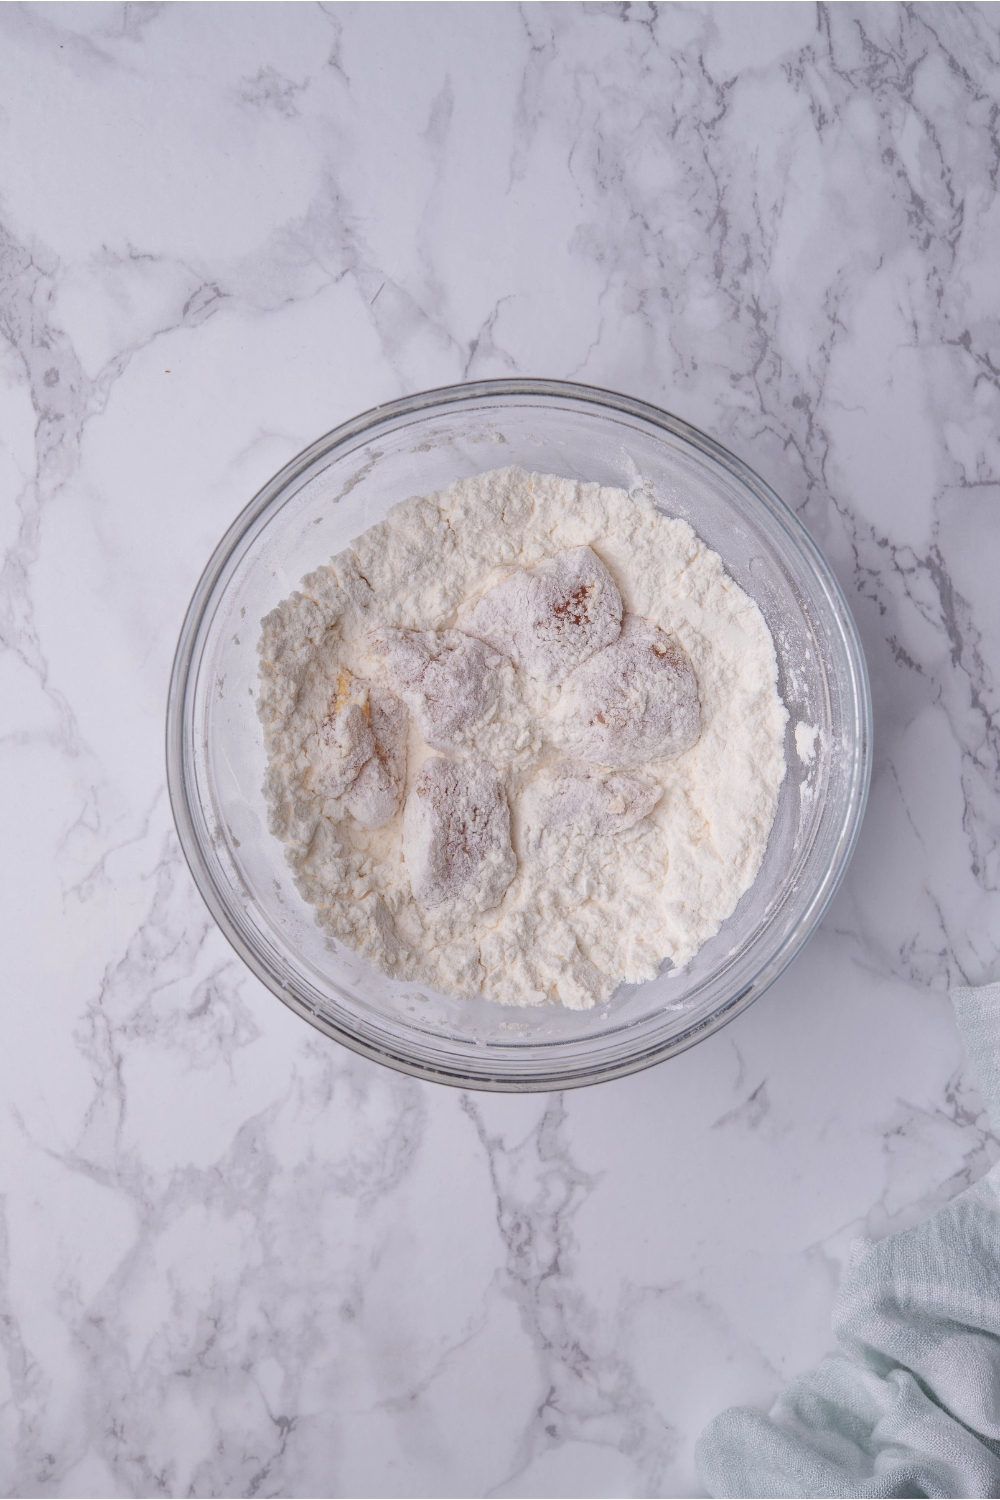 Clear bowl filled with raw chicken pieces in a flour mixture.